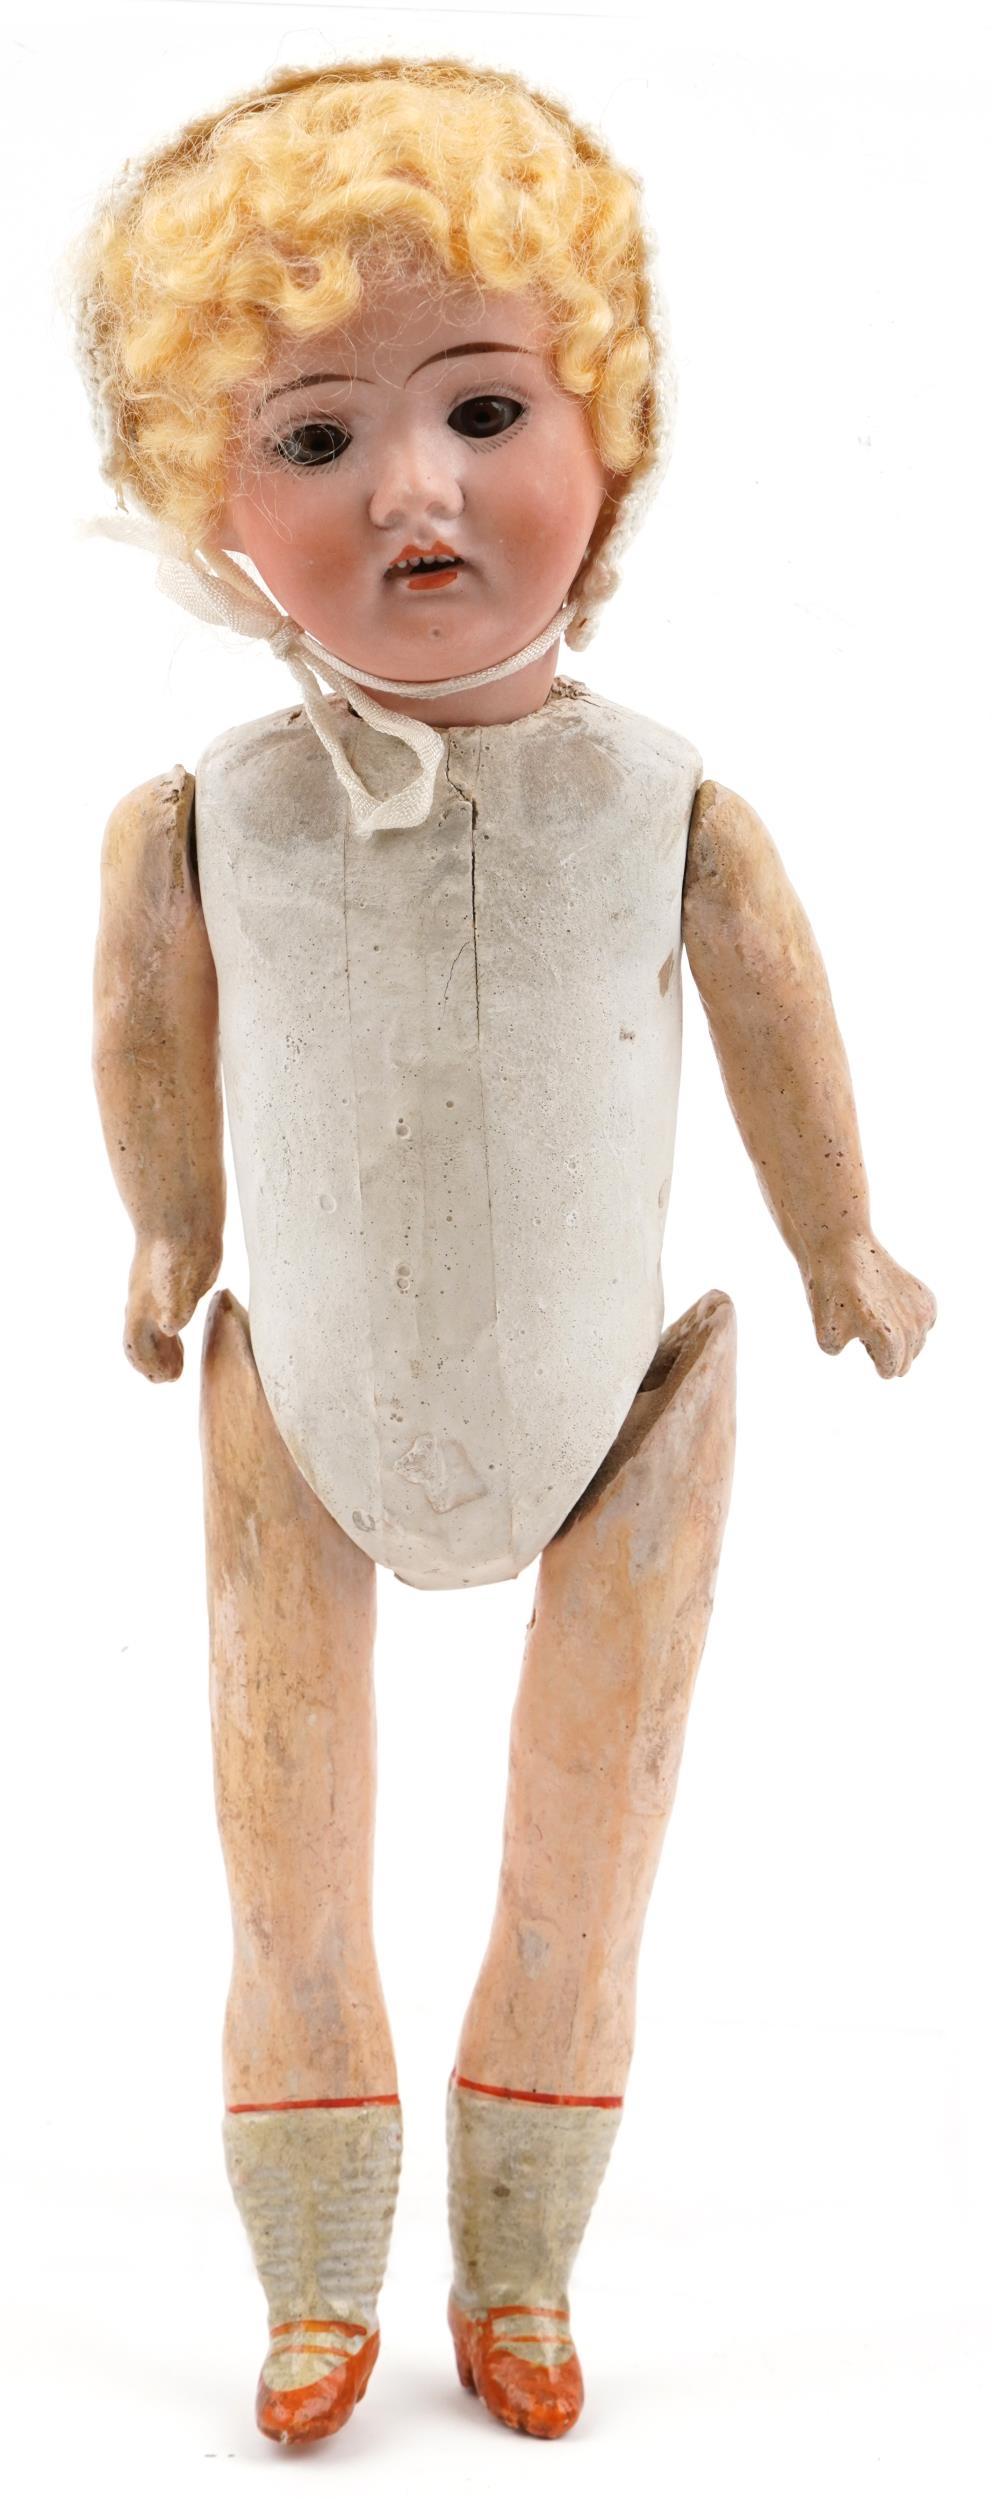 Antique German bisque headed doll with open close eyes and jointed limbs, impressed 21 R 8/0 2 to